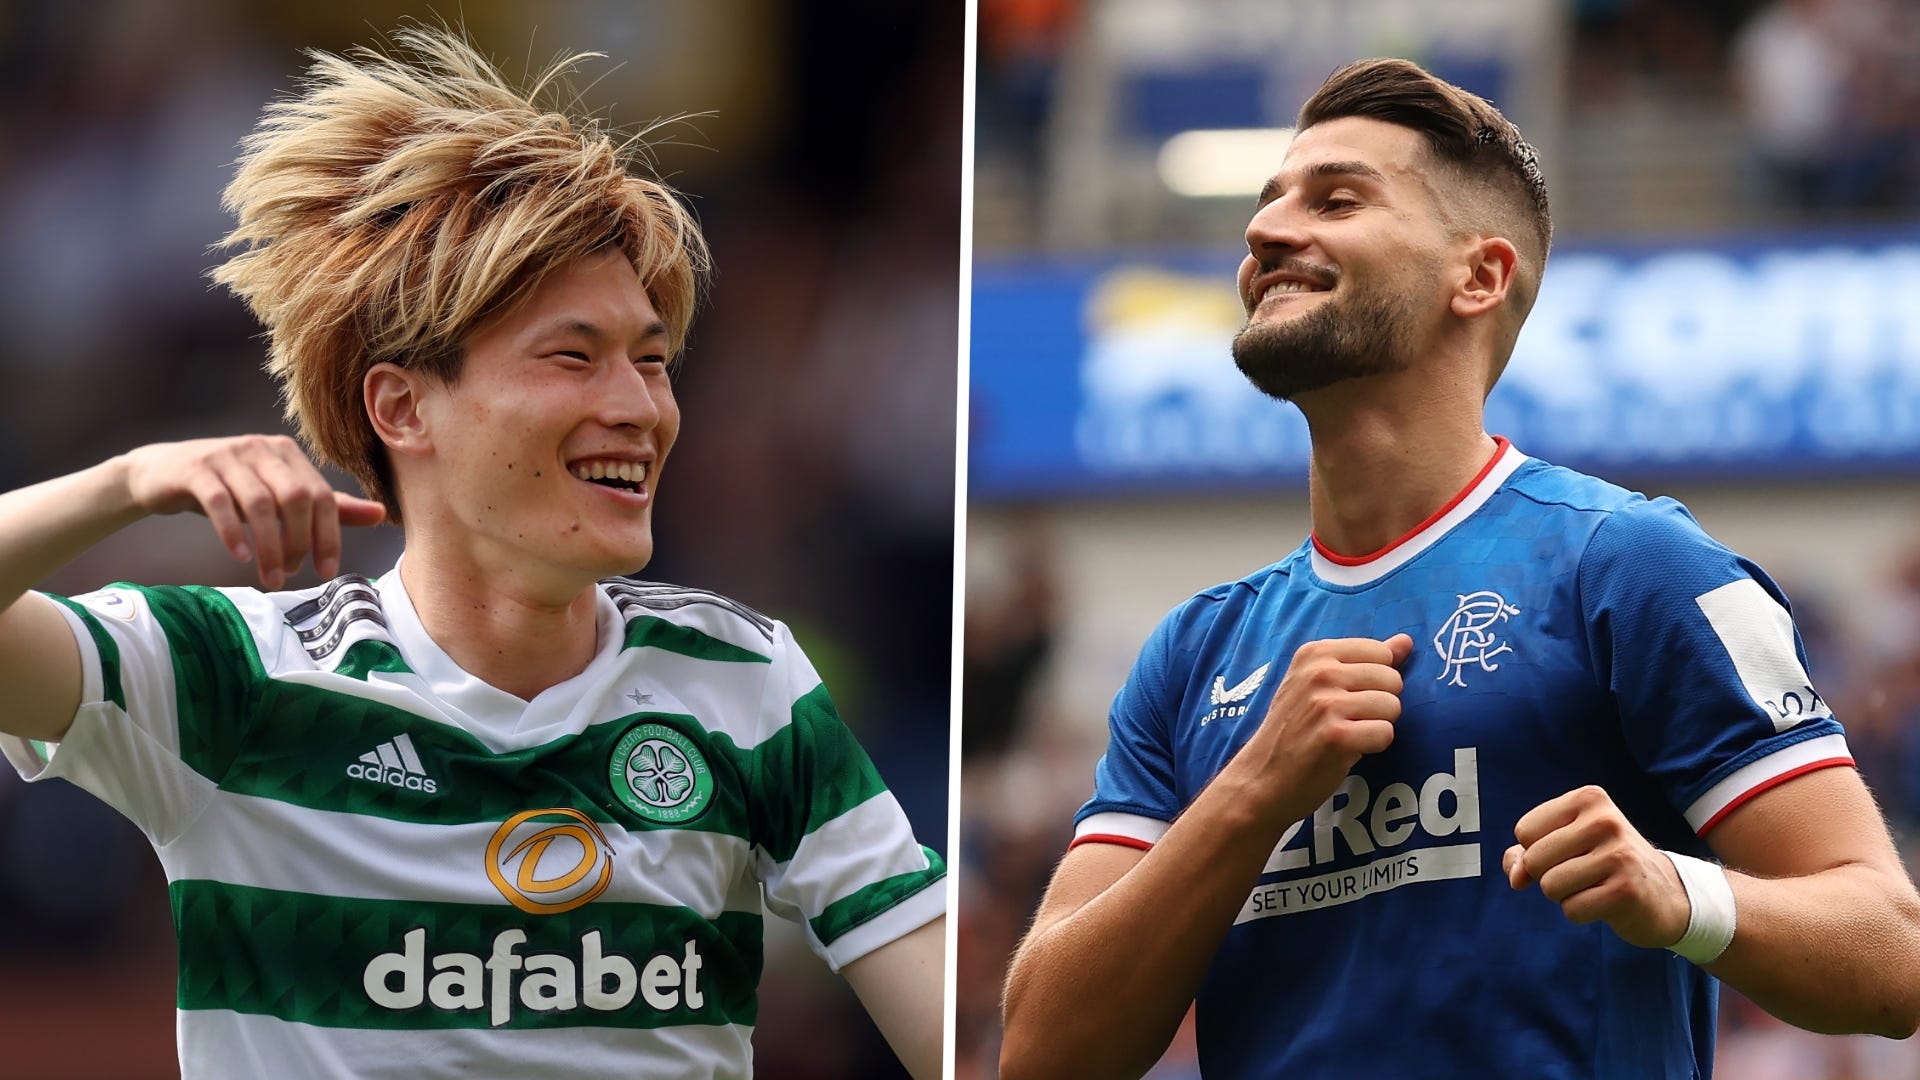 Celtic vs Rangers Live stream, TV channel, kick-off time and how to watch Goal